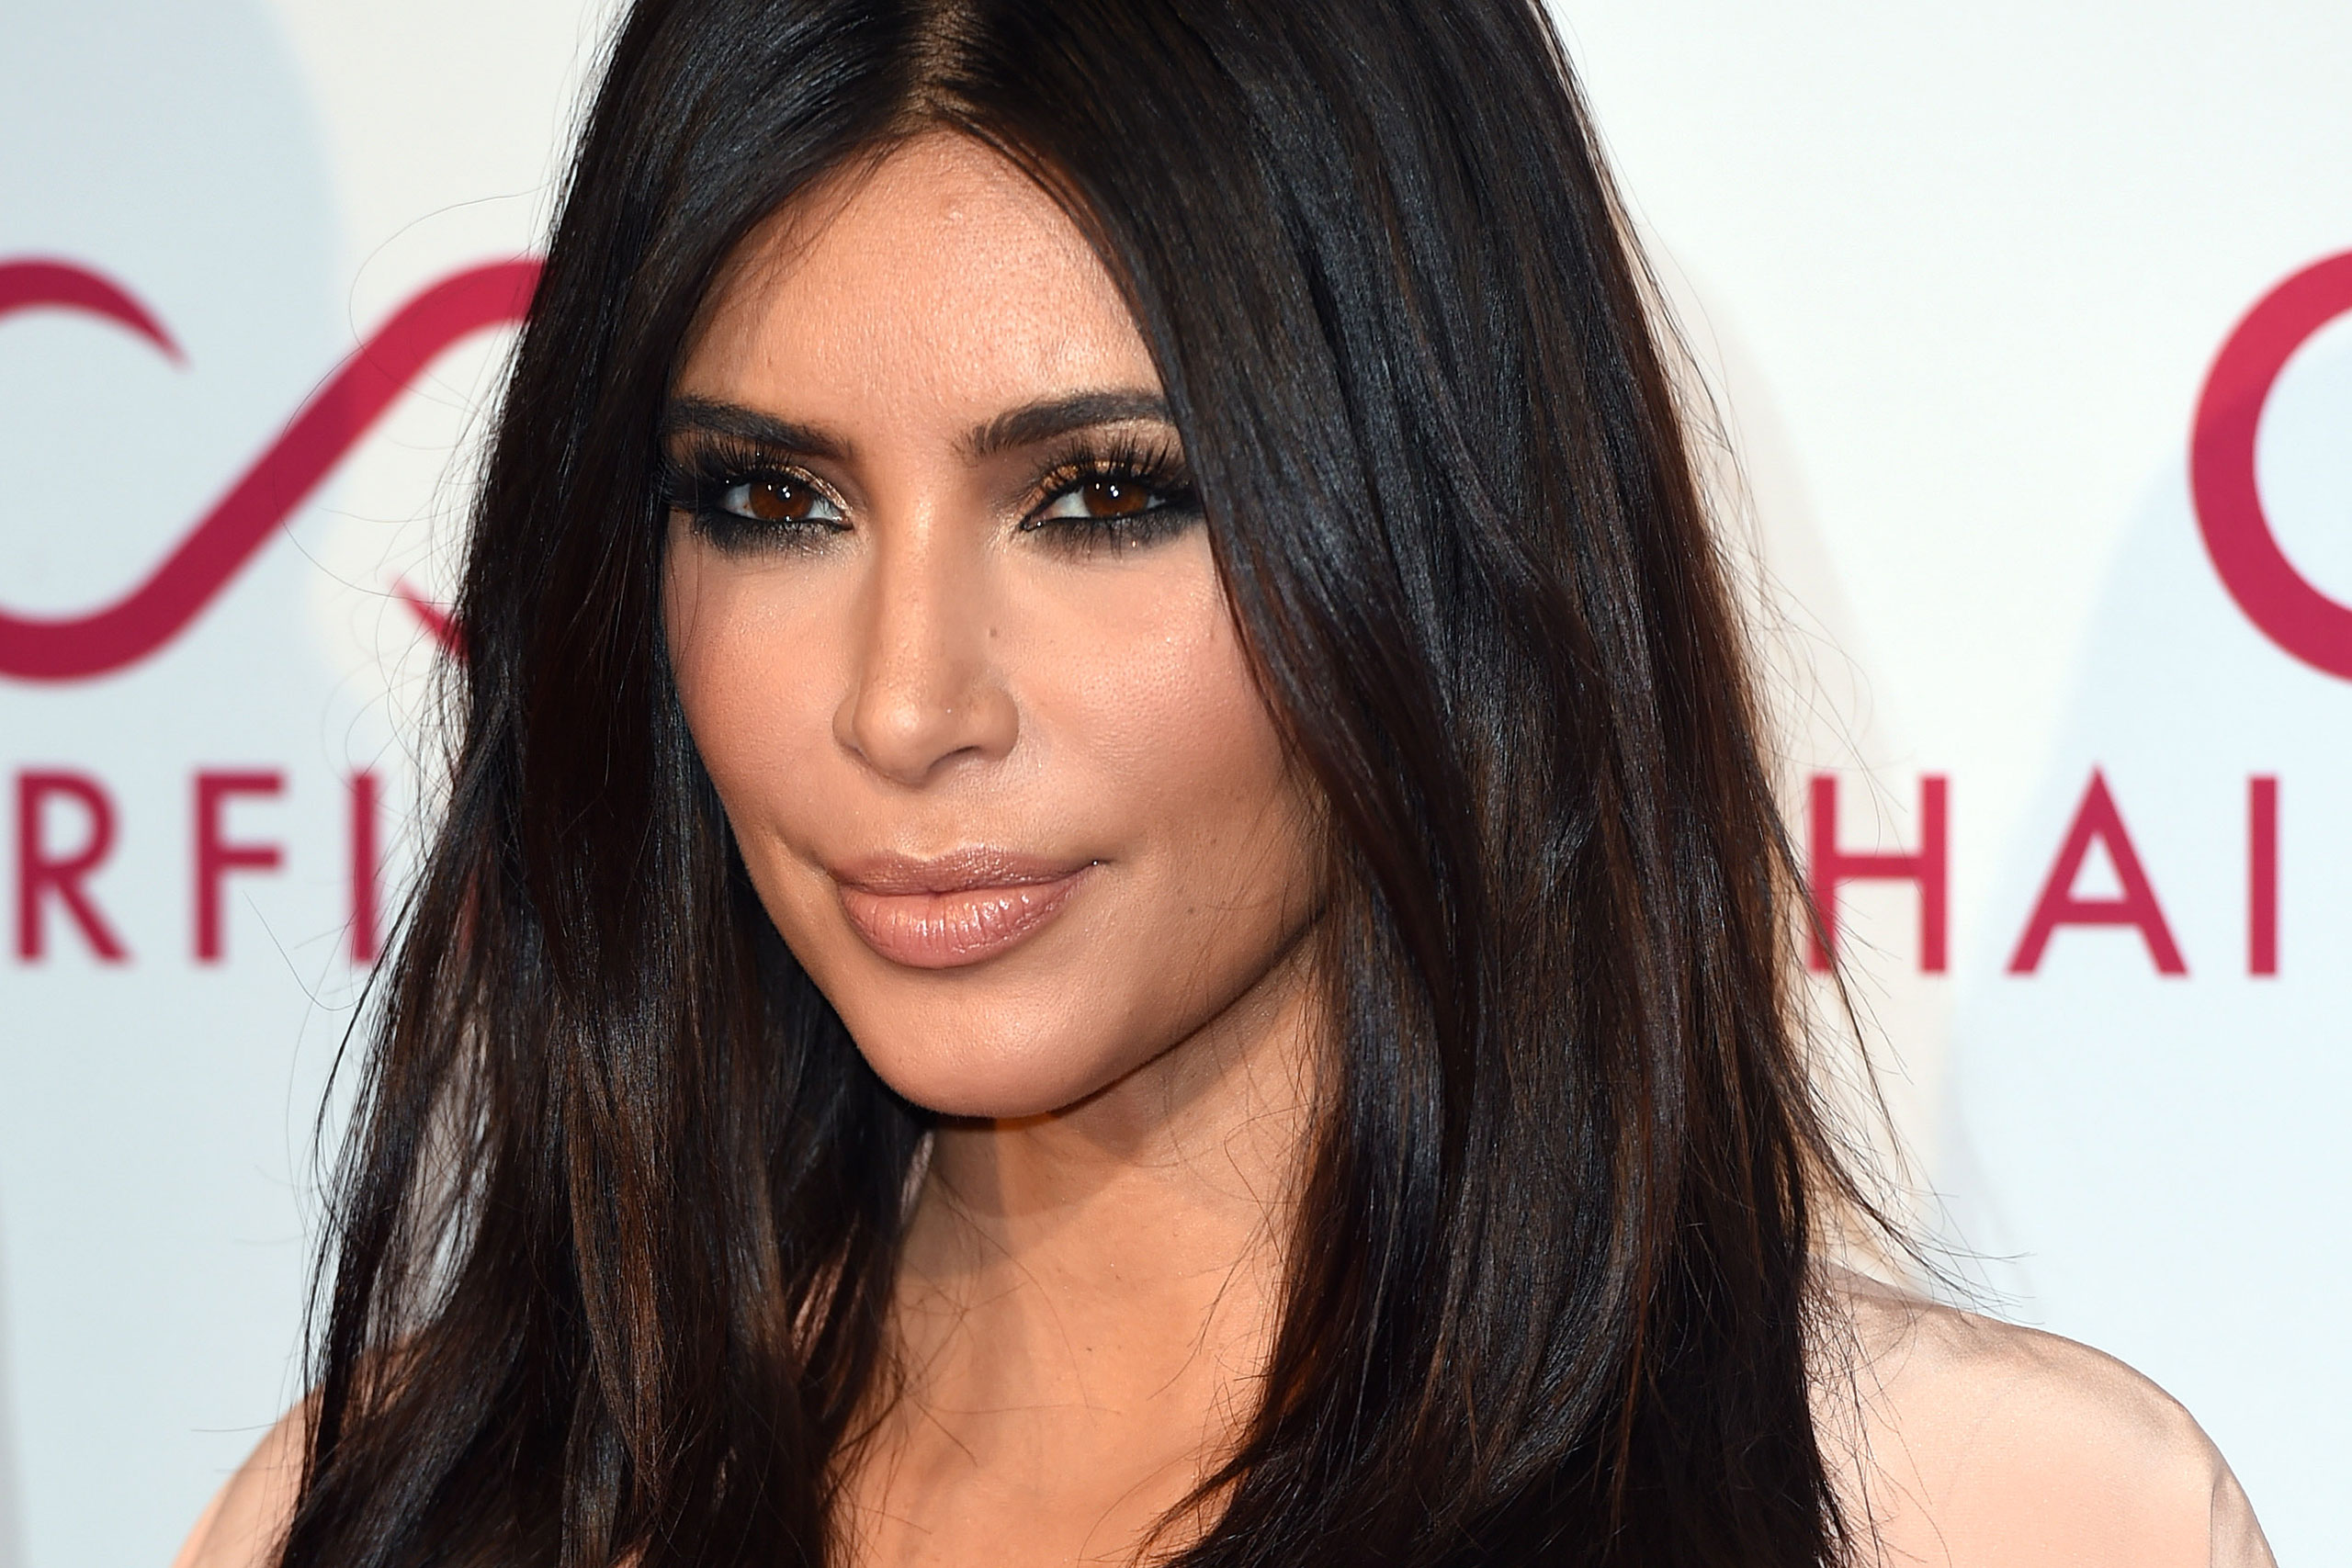 Kim Kardashian attends the Hairfinity UK Launch Party on Nov. 8, 2014 in London. (Karwai Tang—WireImage/Getty Images)